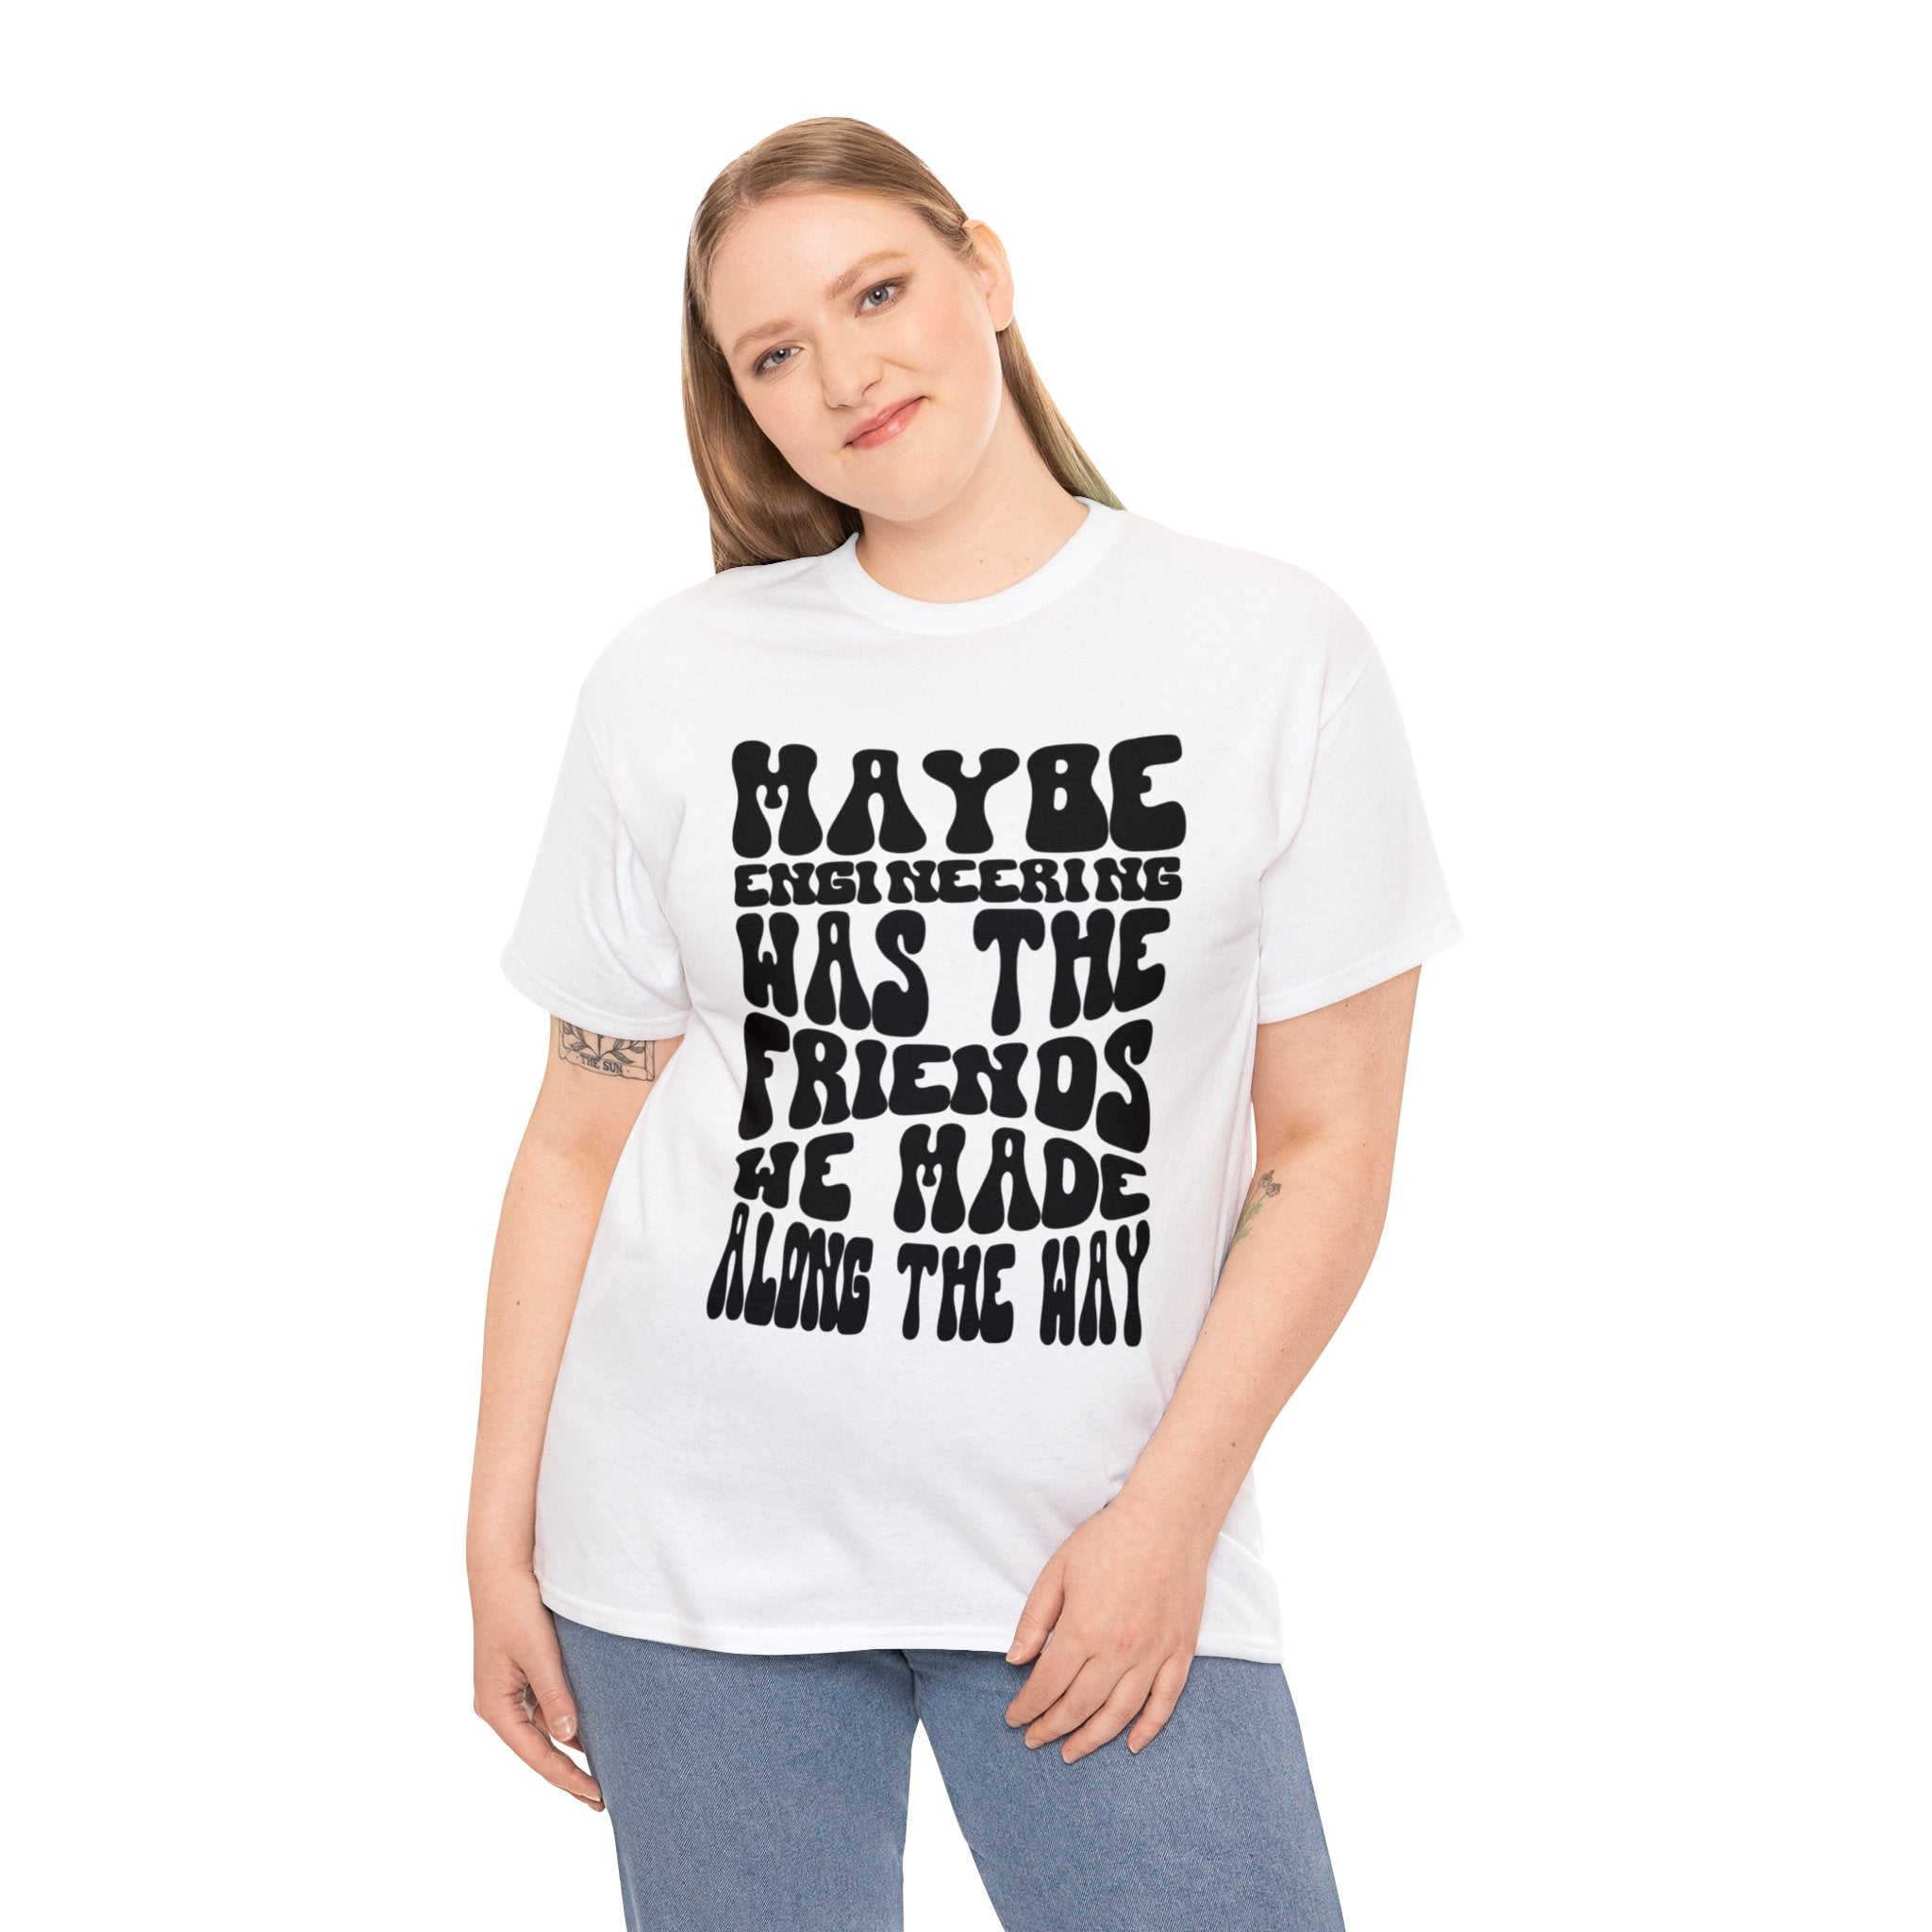 Maybe Engineering was the friends we made along the way - Unisex Heavy Cotton Tee